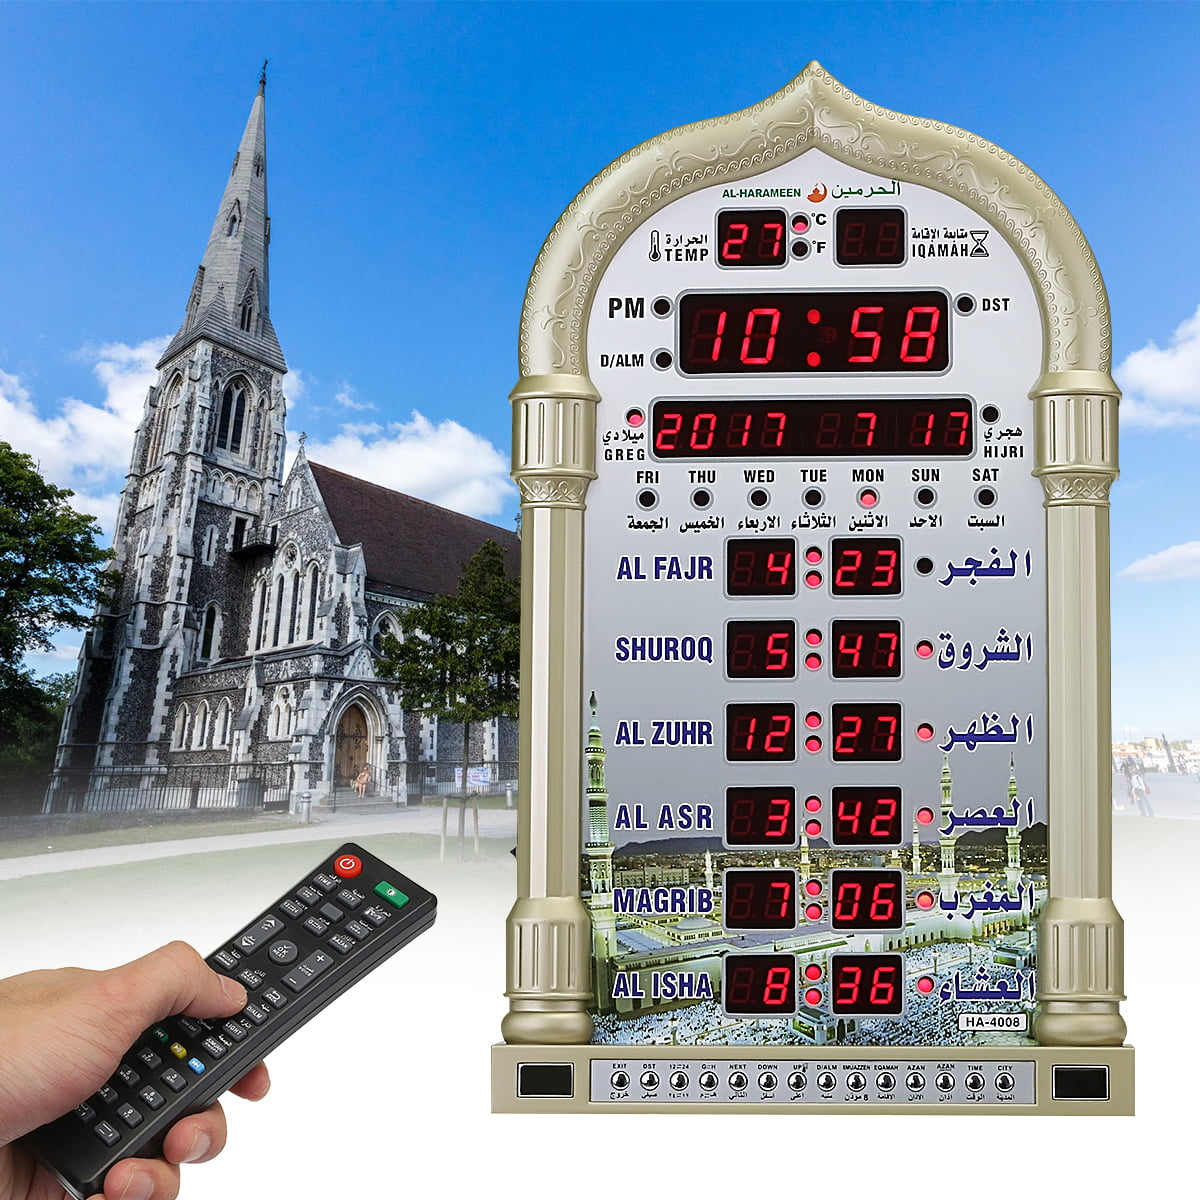 Sync with Mosque Decorative Full Color HD Display,Home/Office/Mosque Digital Athan Clock Muslim Masjidal 10 inch Azan Clock Athan Frame